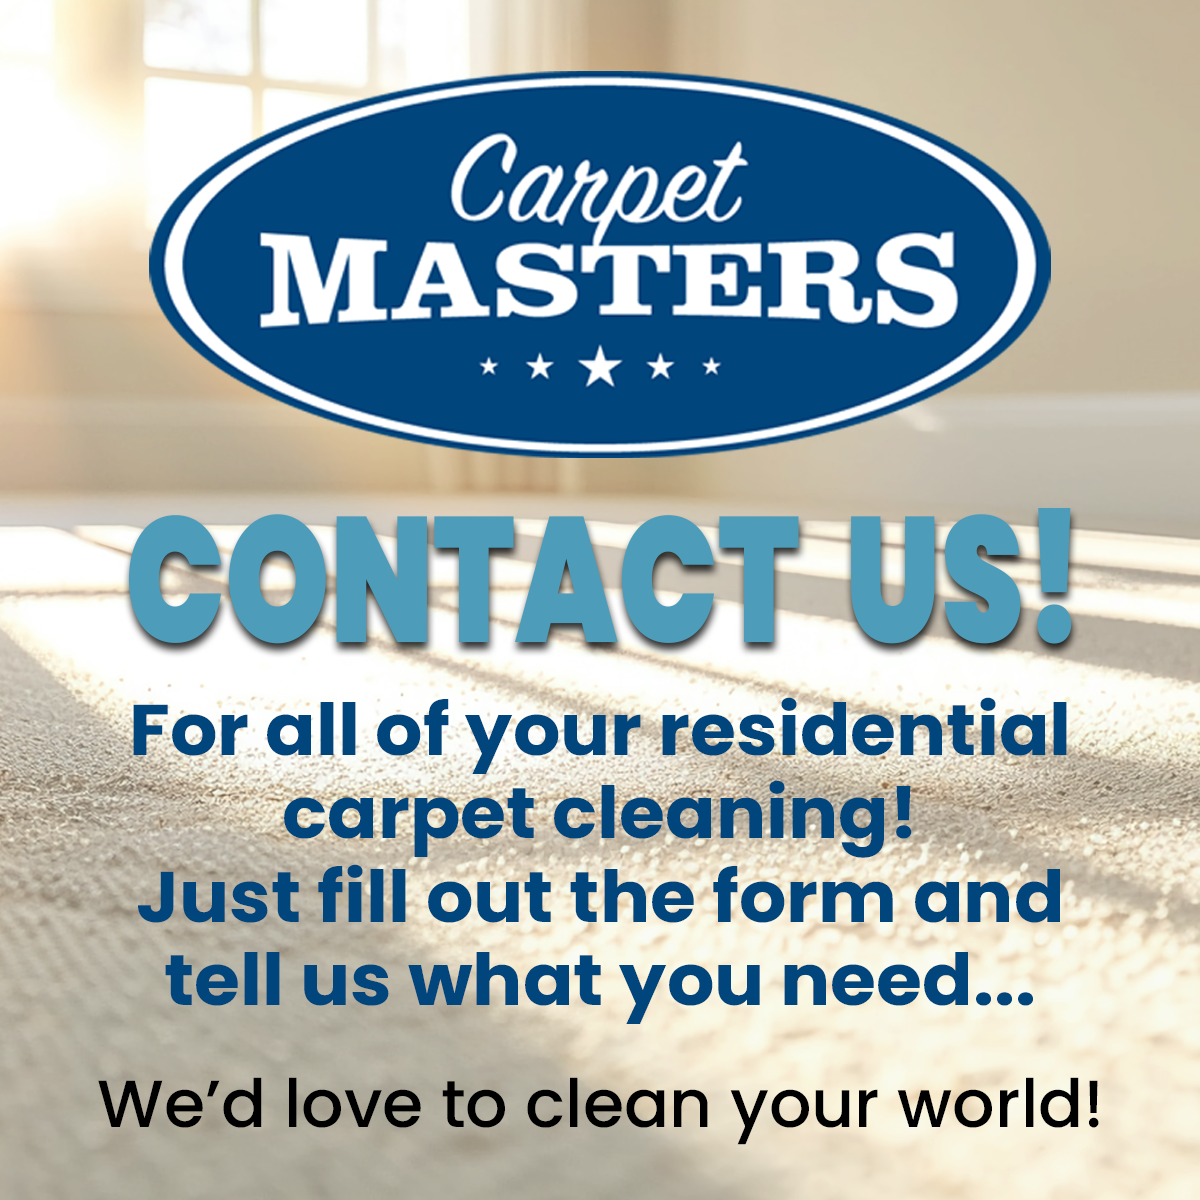 Contact Us for all of your residential carpet cleaning! Just tell us what you need...